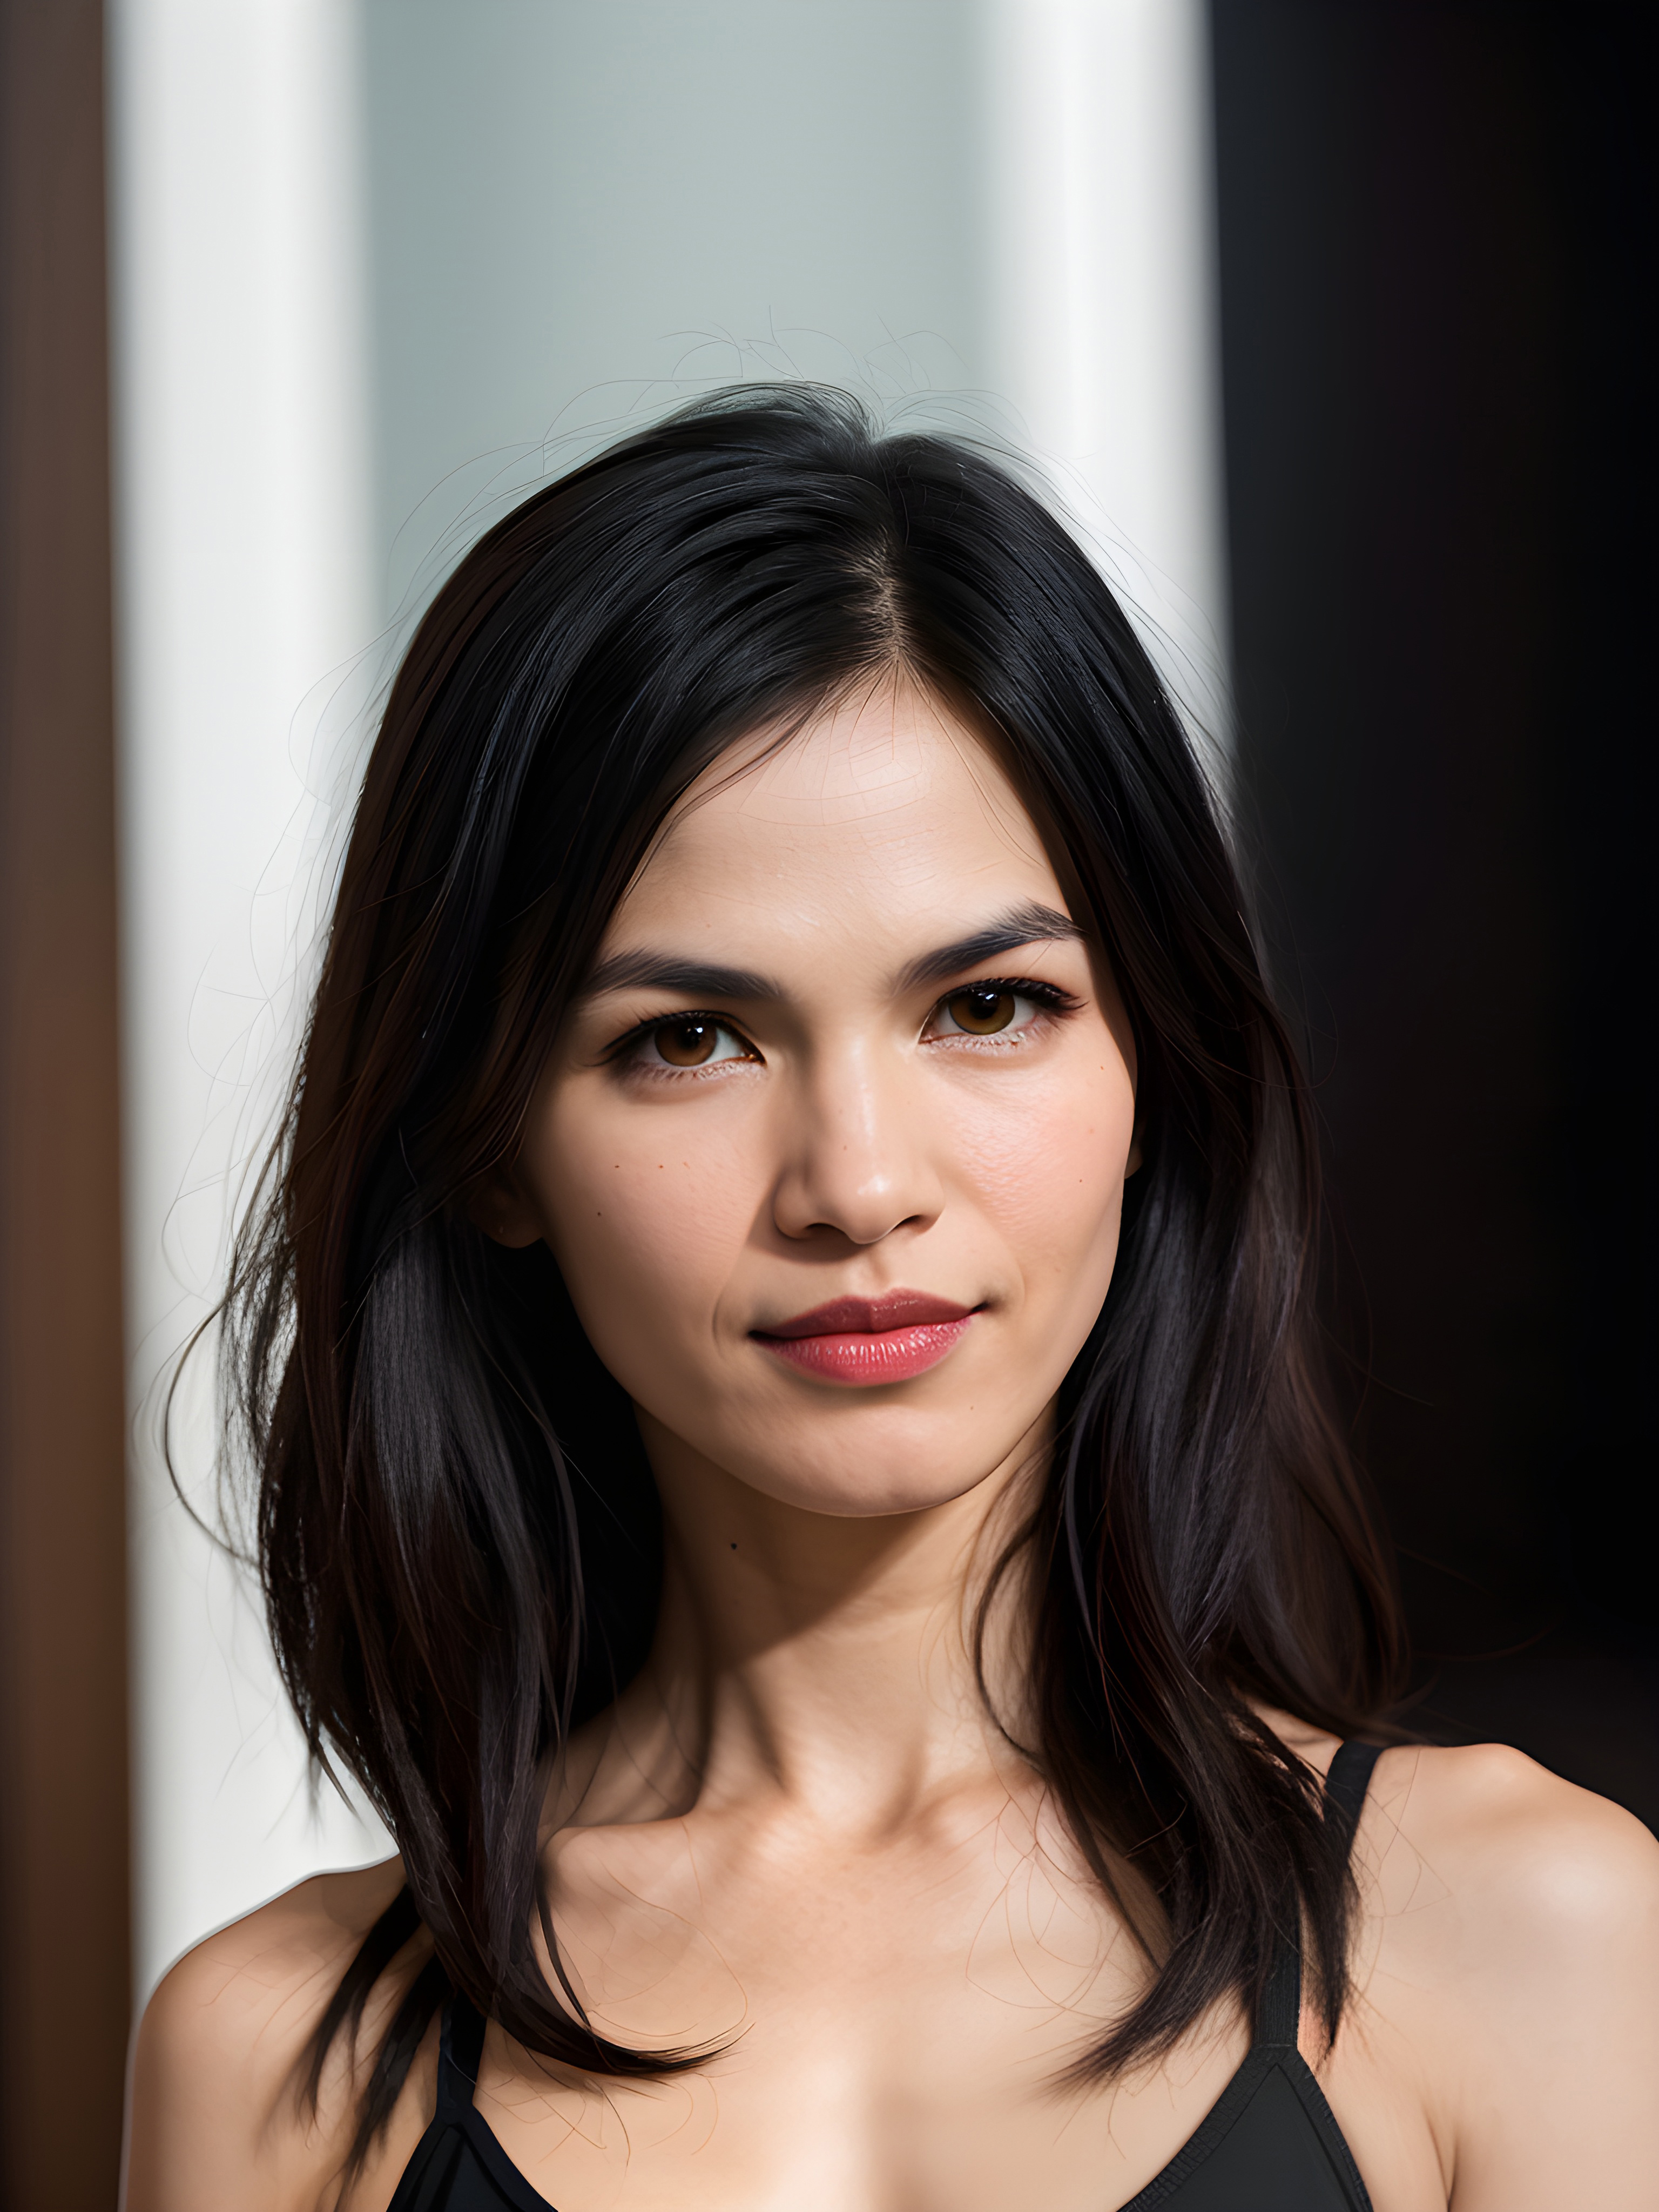 Elodie Yung image by fraggle